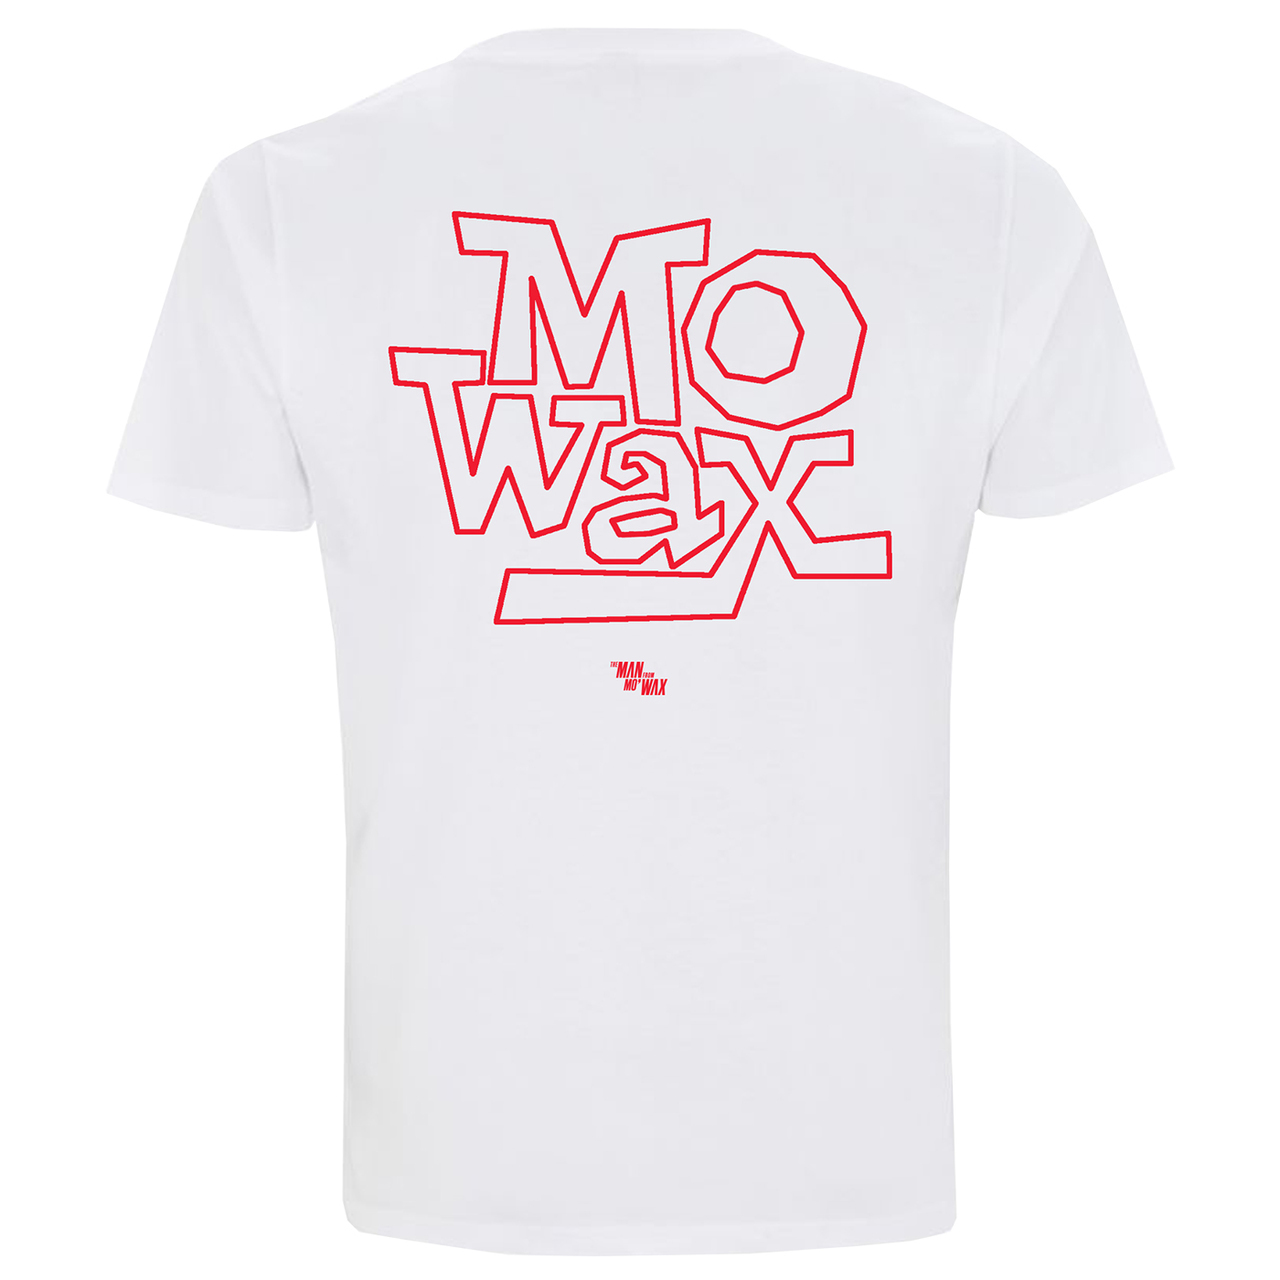 White / Red Tee Back